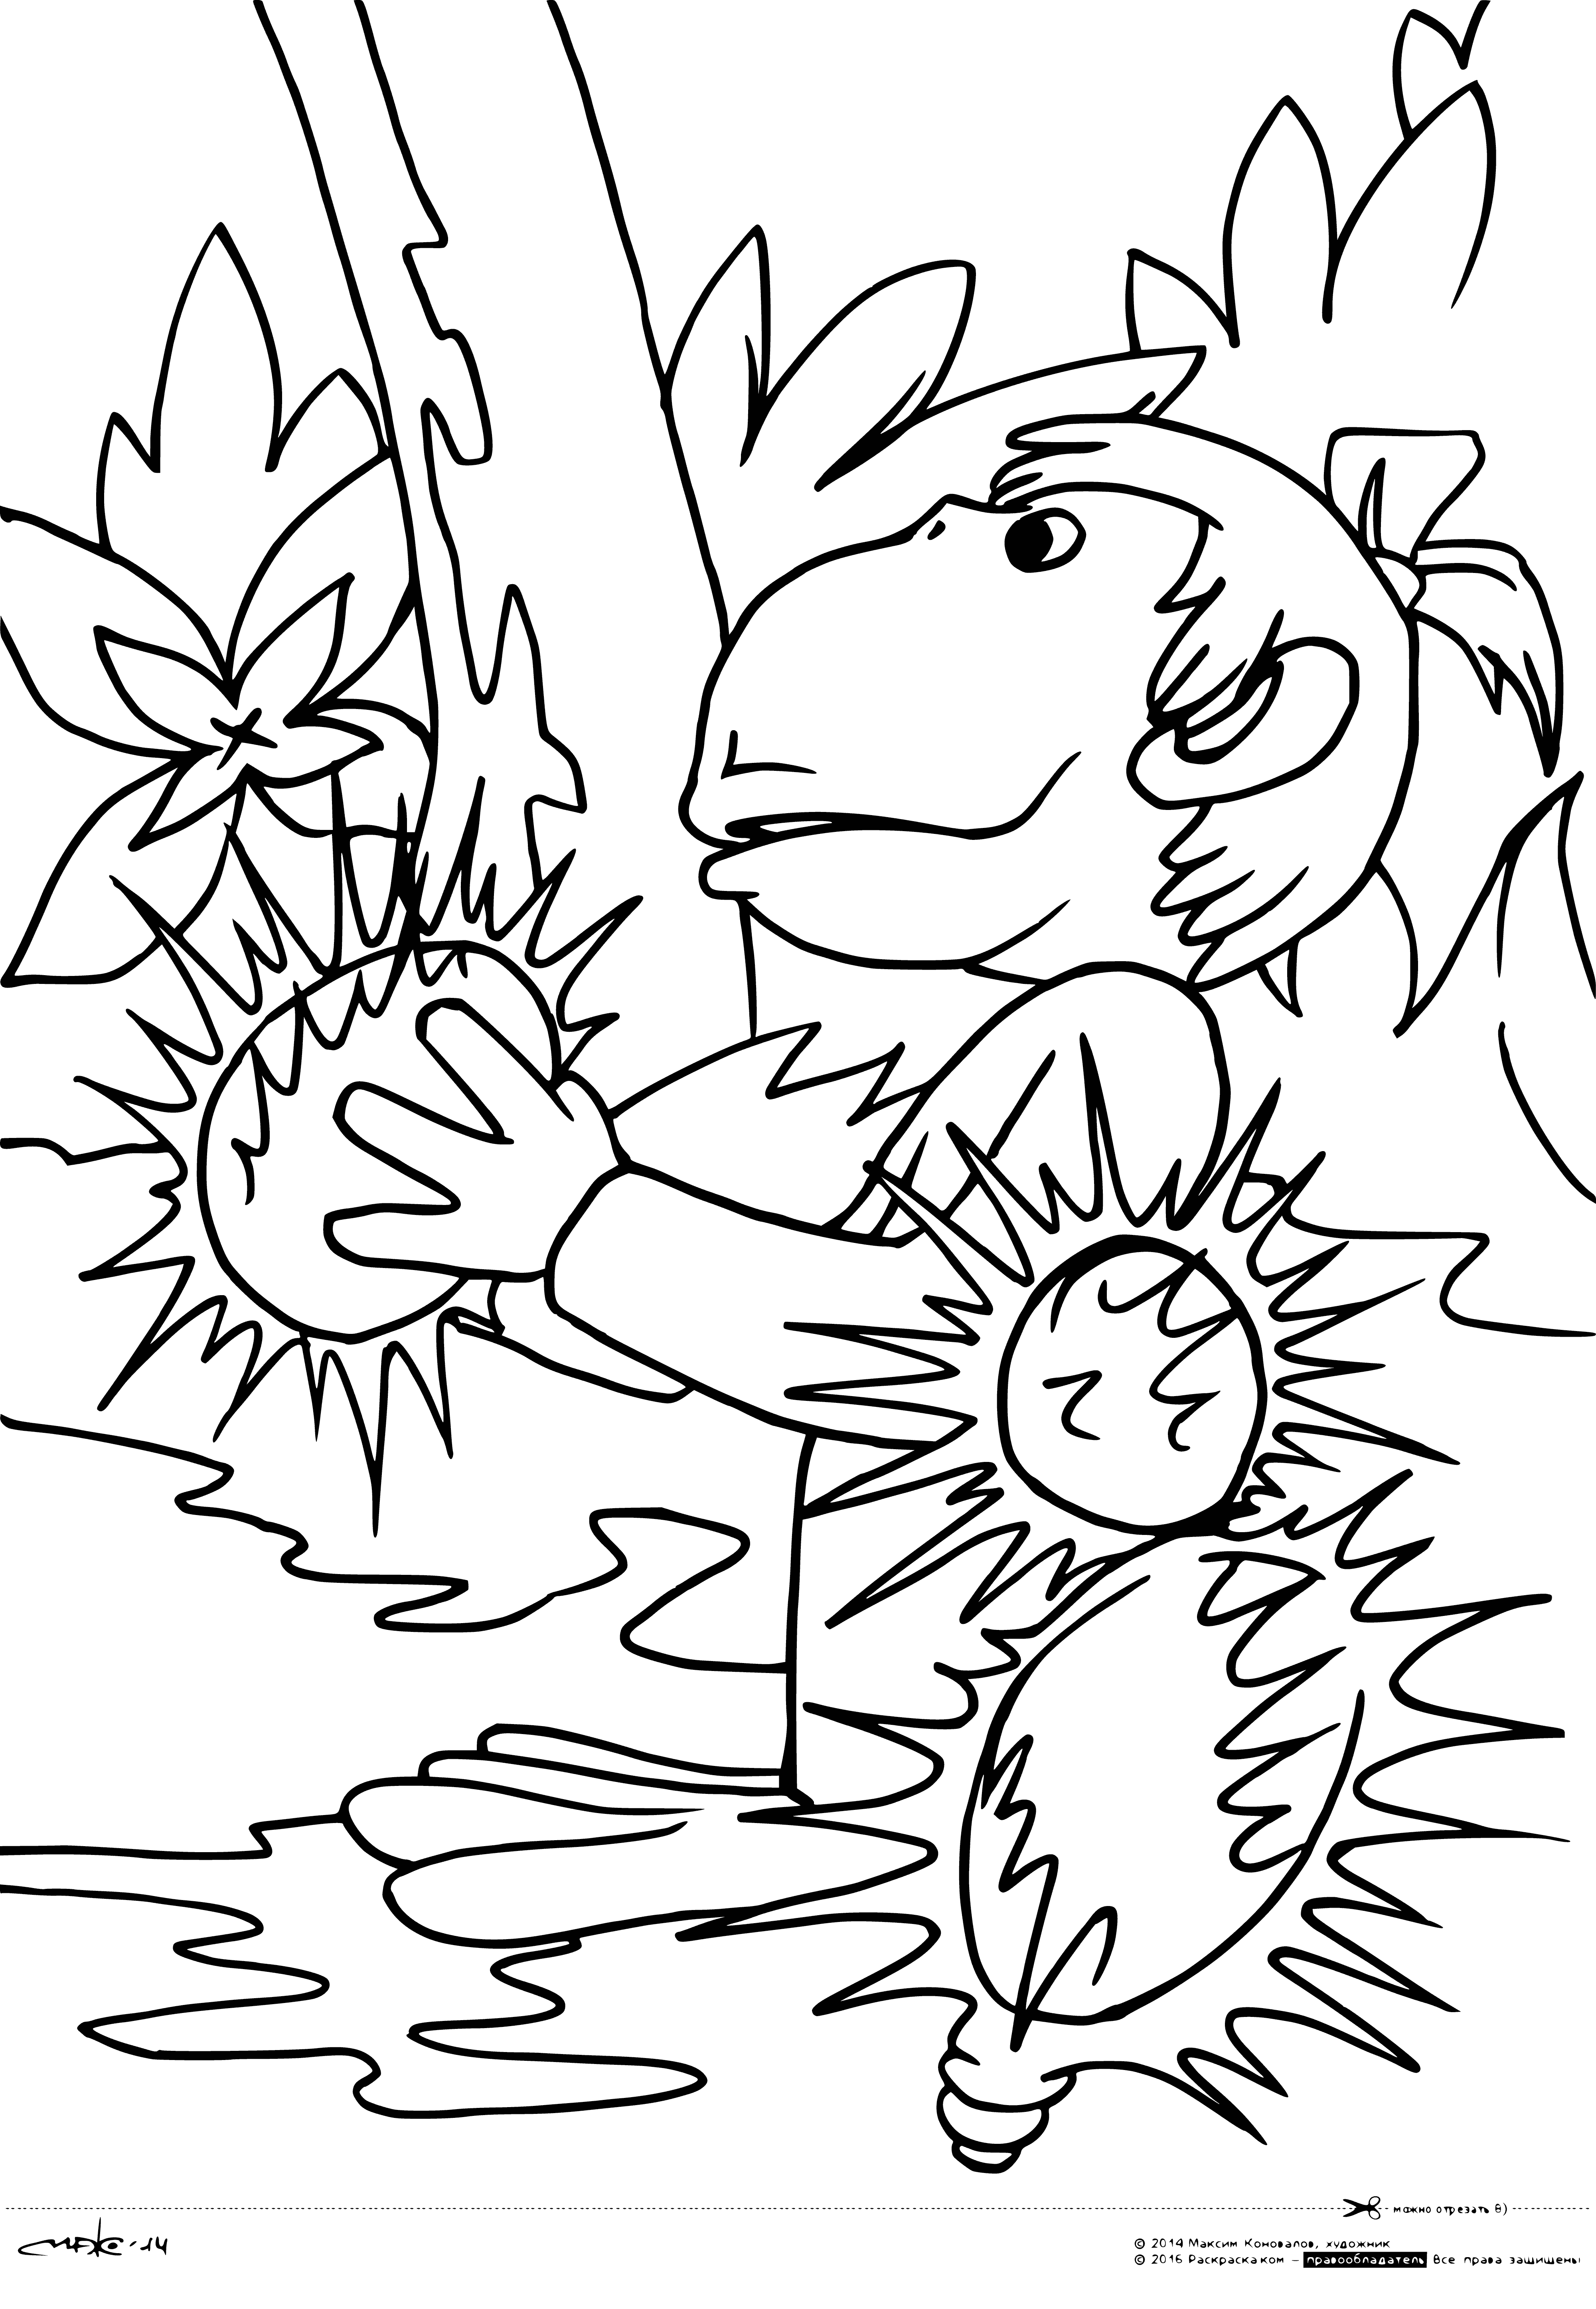 coloring page: 38 parrots in coloring page - 2 yellow, 1 orange, 2 red, 1 purple & rest shades of green, some sitting on tree, some flying.